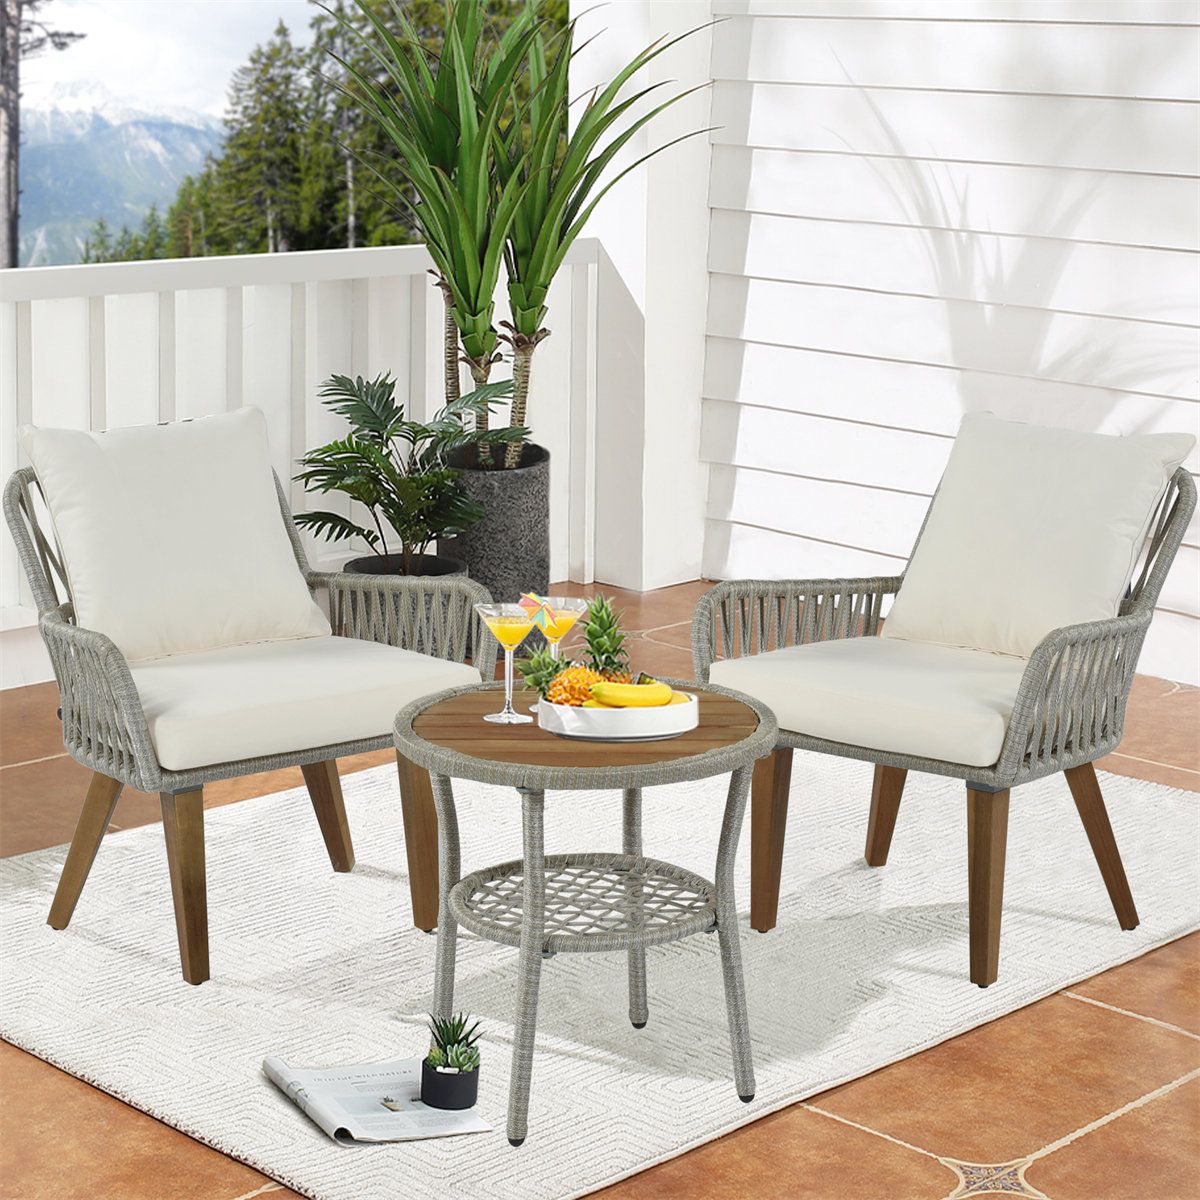 Corrigan Studio® 3 Piece Bistro Set Woven Rope Conversation Set, Wood  Tabletop And Cushions Gray Rope+beige Fabric | Wayfair For Woven Rope Outdoor 3 Piece Conversation Set (View 3 of 15)